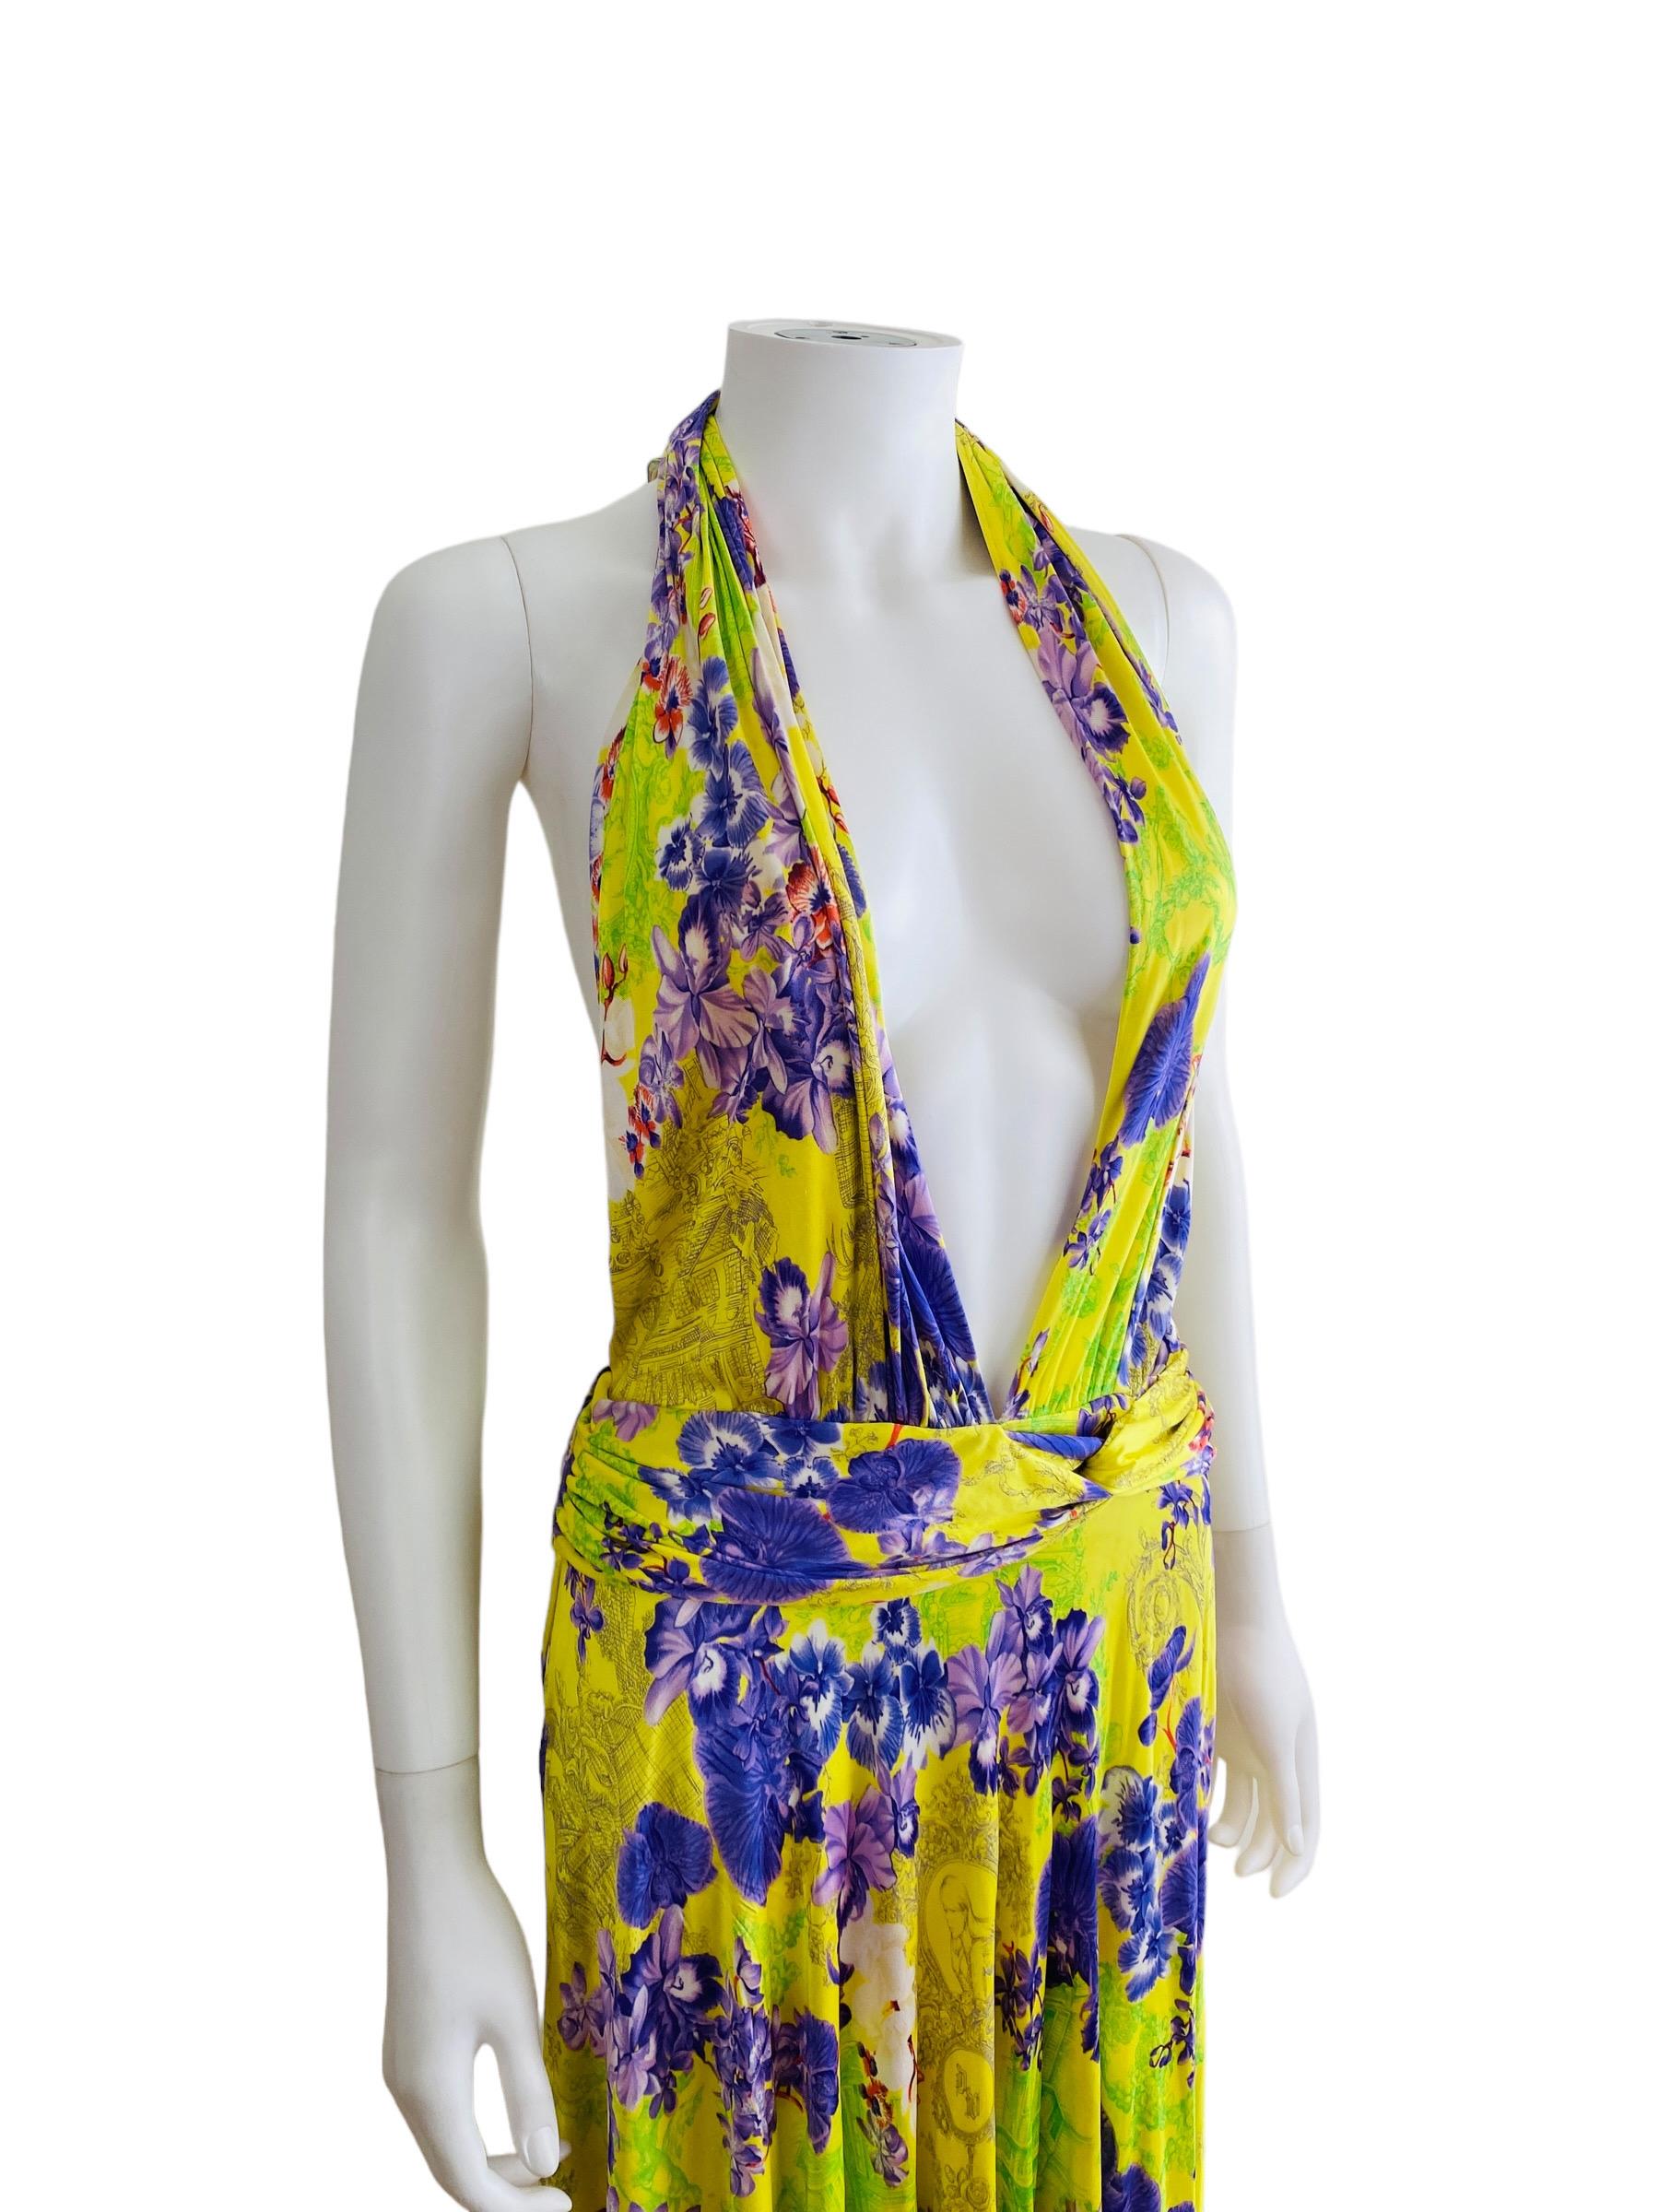 Vintage S/S 2004 Versace Dress Bright Yellow + Purple Orchid Floral Runway For Sale 1